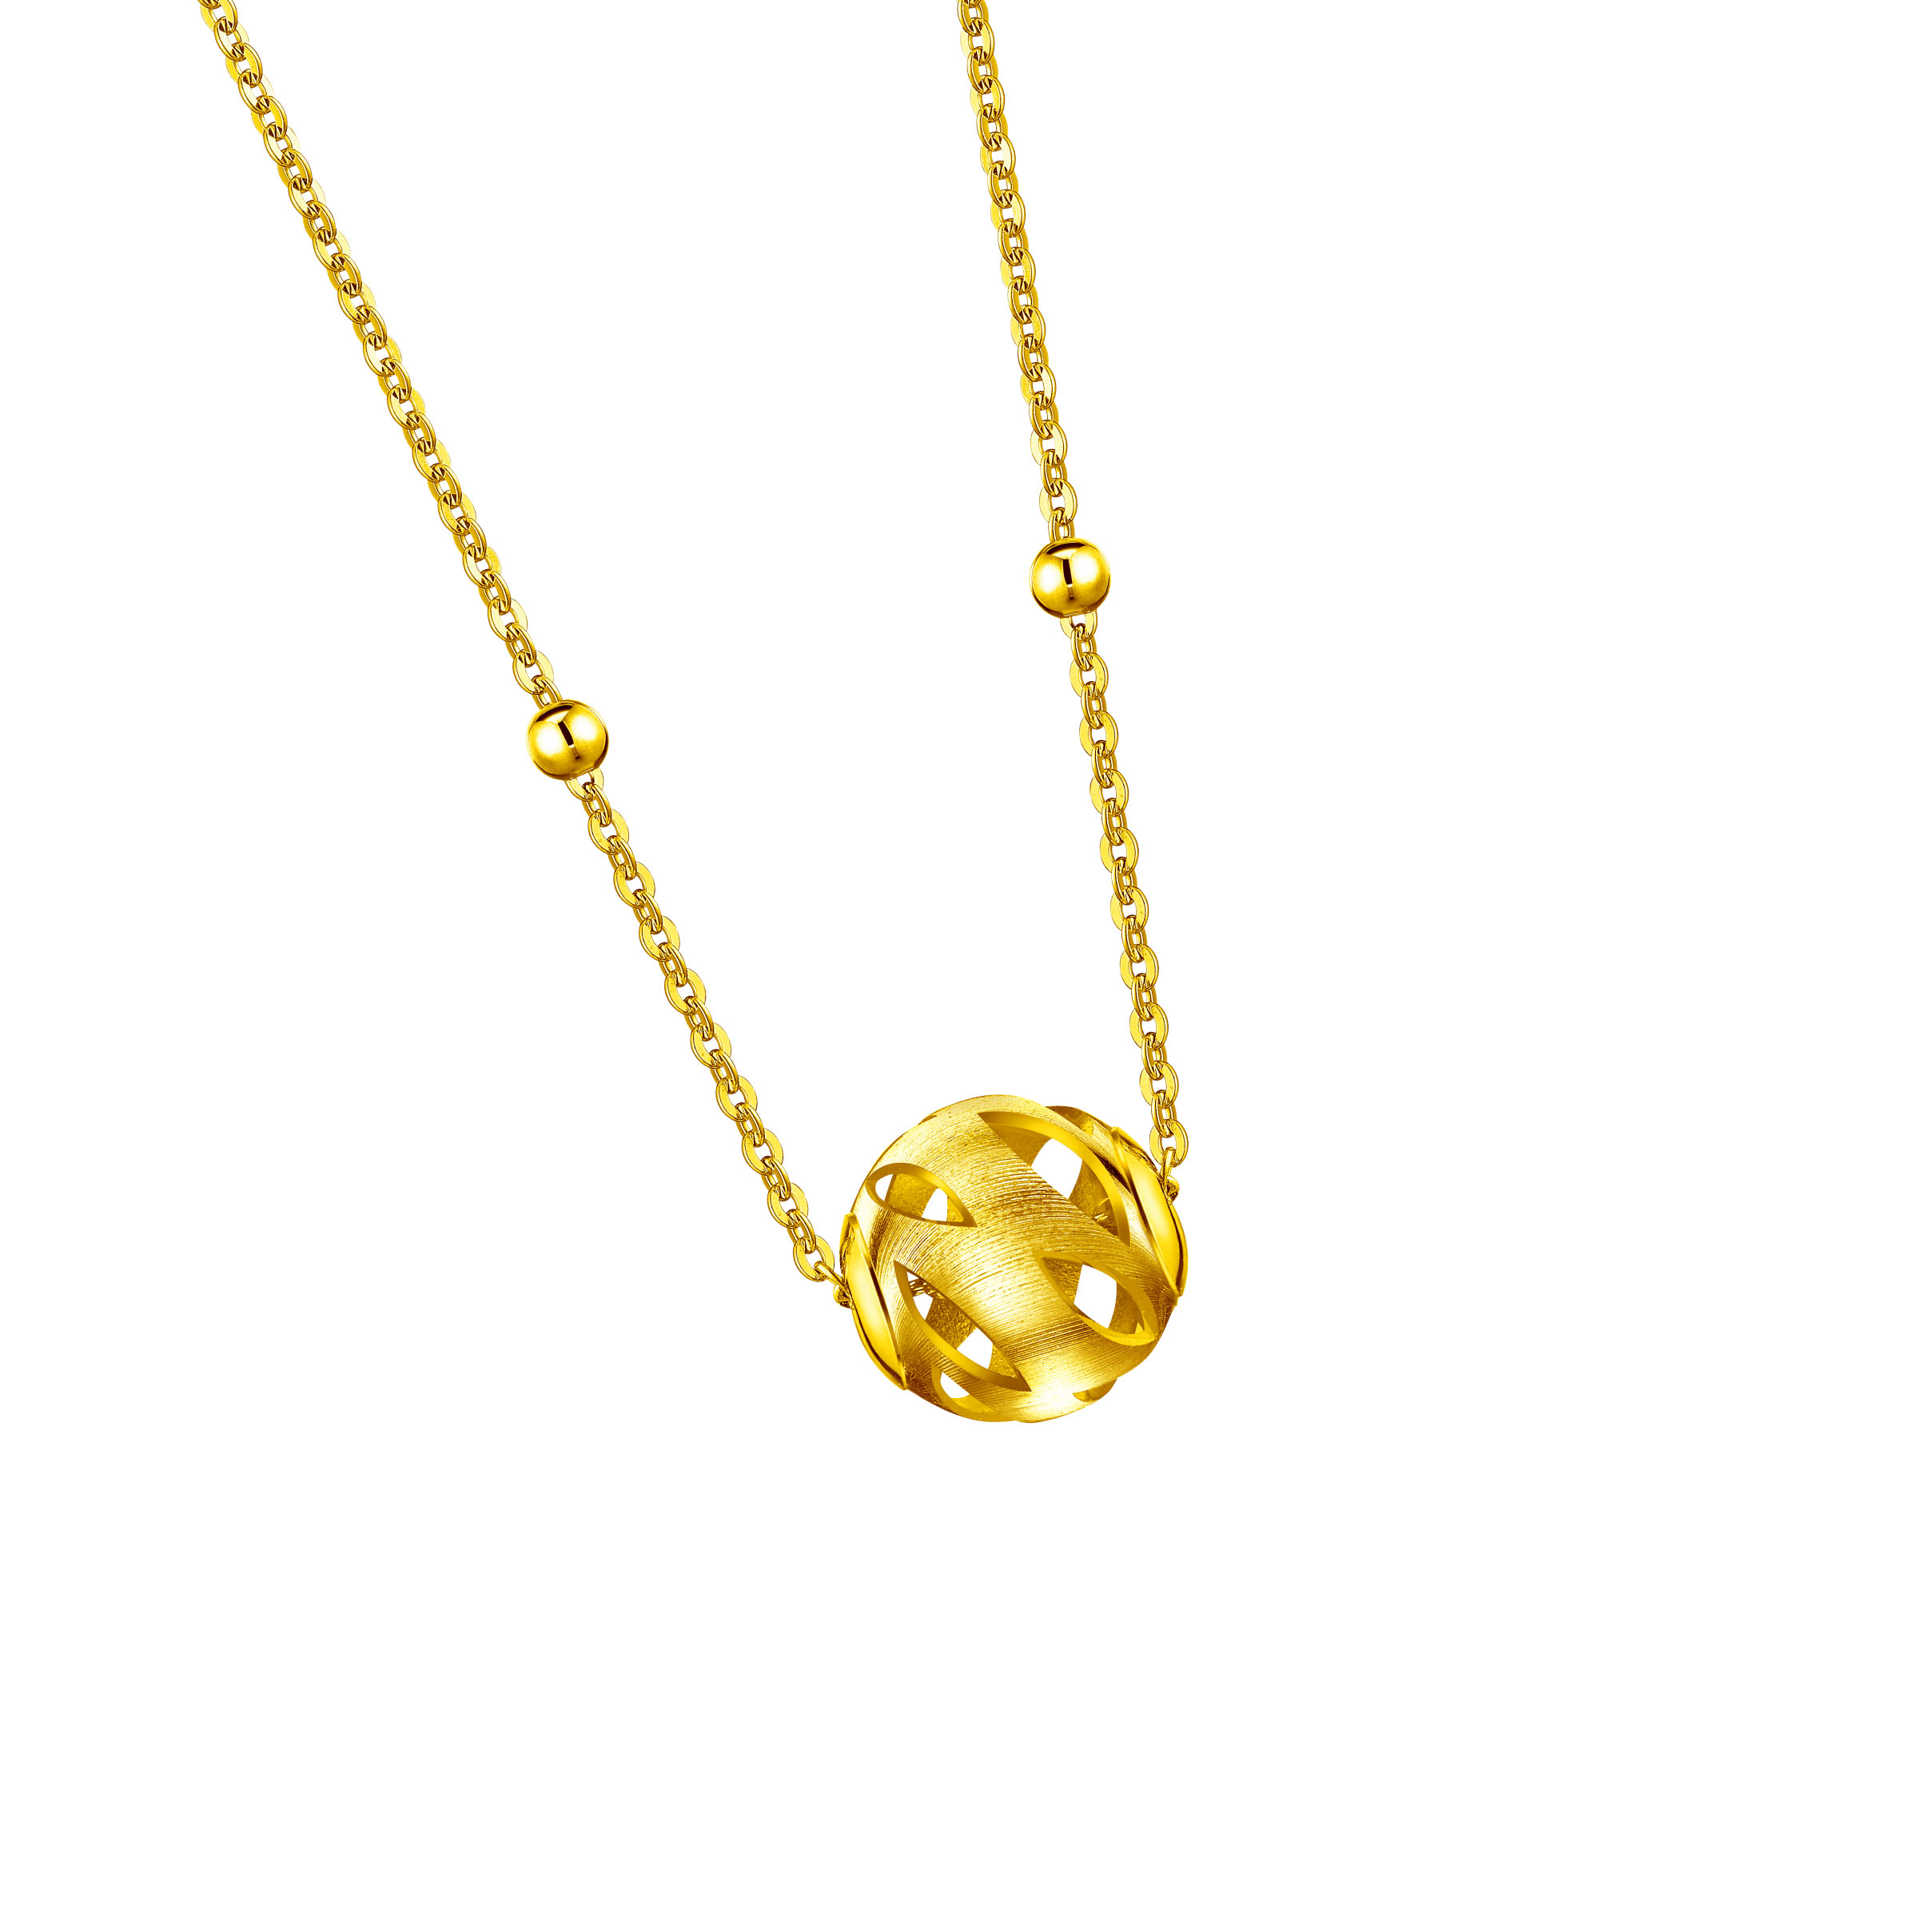 Goldstyle "Planet" Gold Necklace